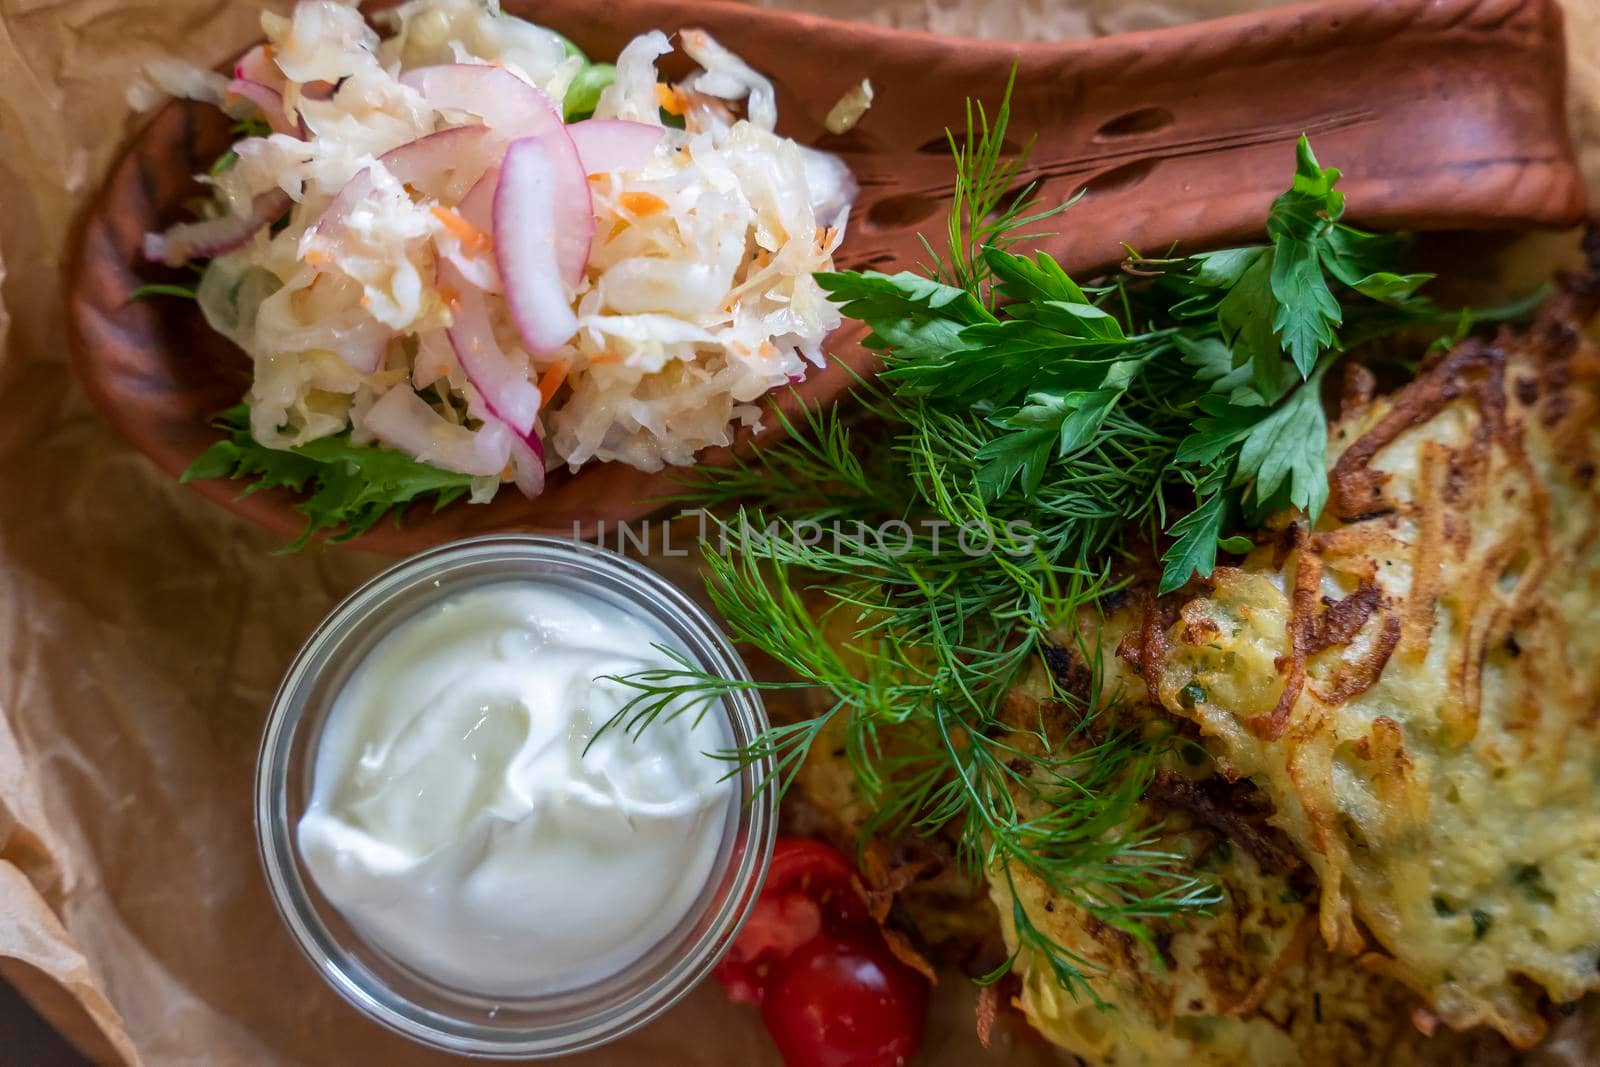 Draniki served with sour cream and herbs in the restaurant by audiznam2609